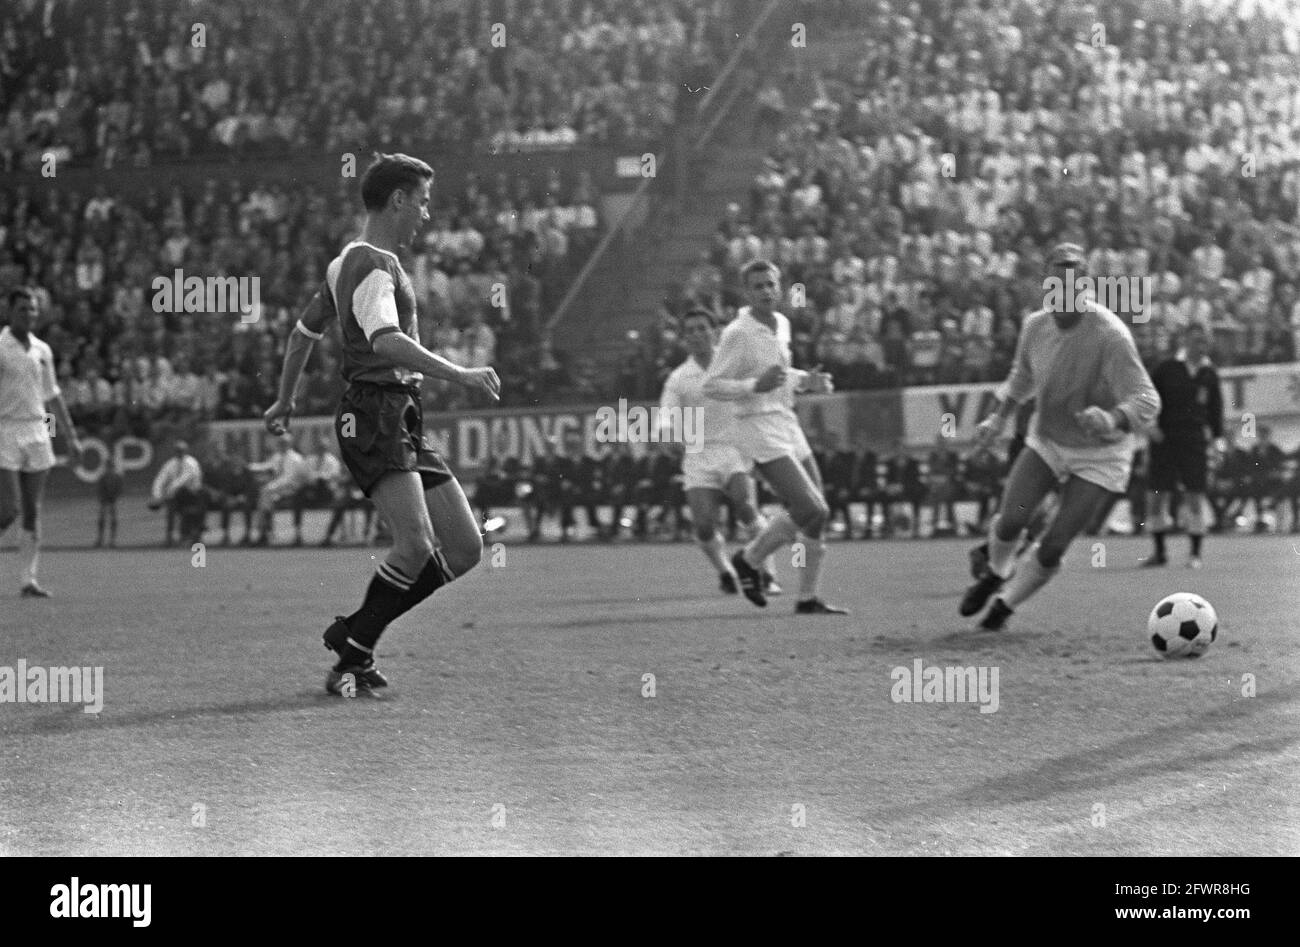 NEC v Feyenoord 0-5. Kindvall scores 2-0 (right) goalkeeper De Bree has the save, August 27, 1967, goalkeepers, sports, soccer, The Netherlands, 20th century press agency photo, news to remember, documentary, historic photography 1945-1990, visual stories, human history of the Twentieth Century, capturing moments in time Stock Photo